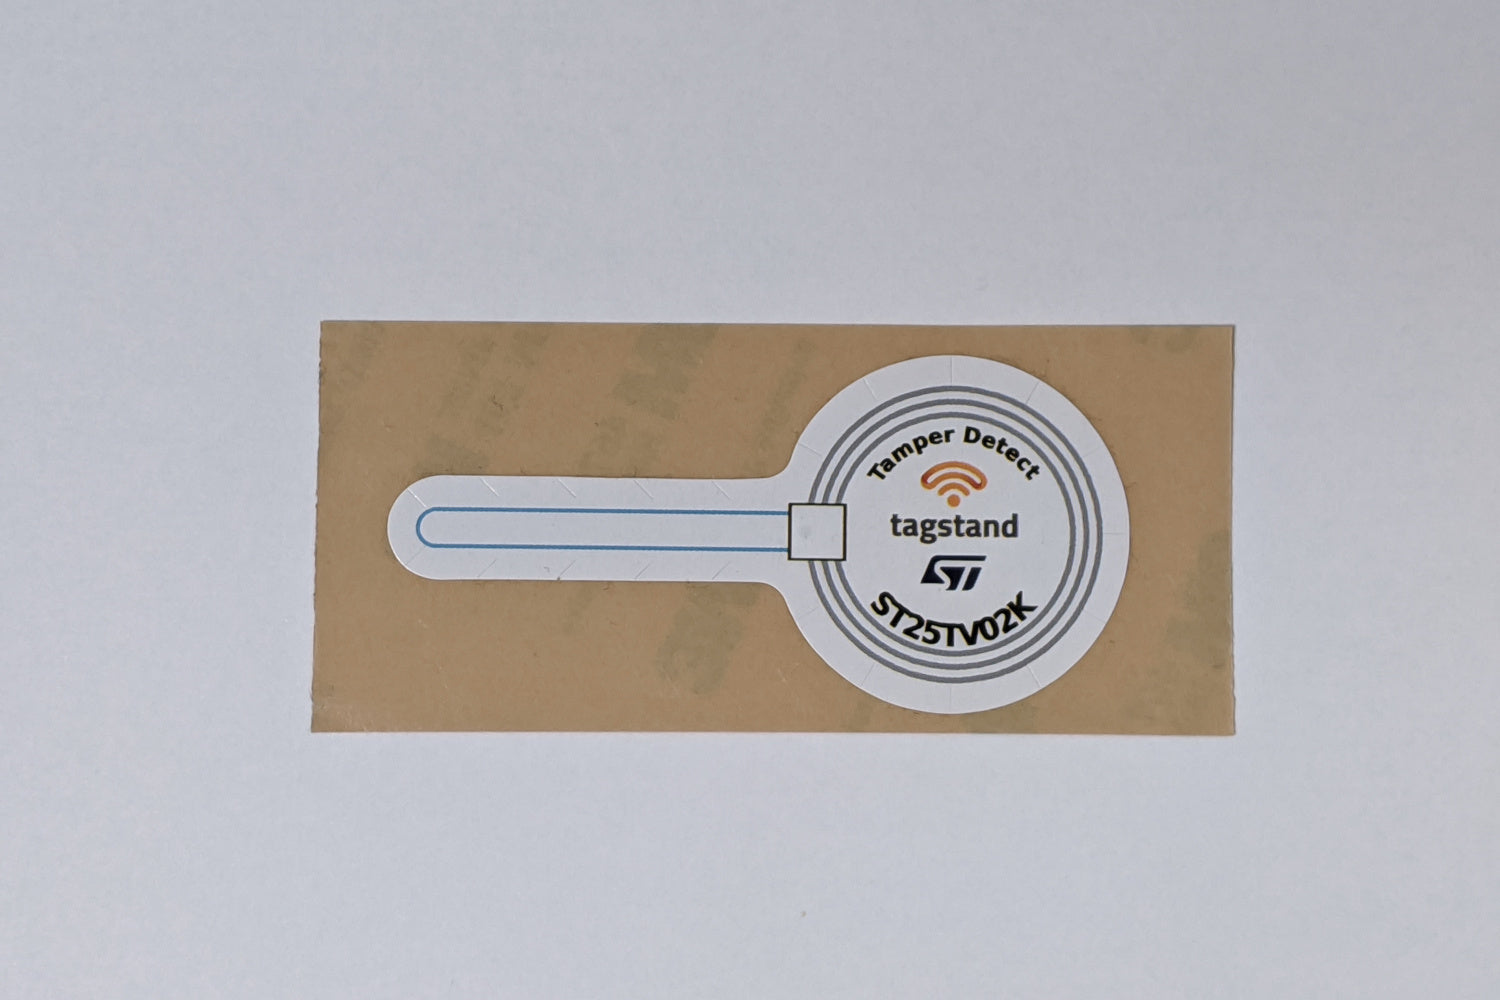 NFC Sticker - Paper - ST25TV02K-AD (TD) - 35mm diameter with 27.5x10mm tamper detect tail